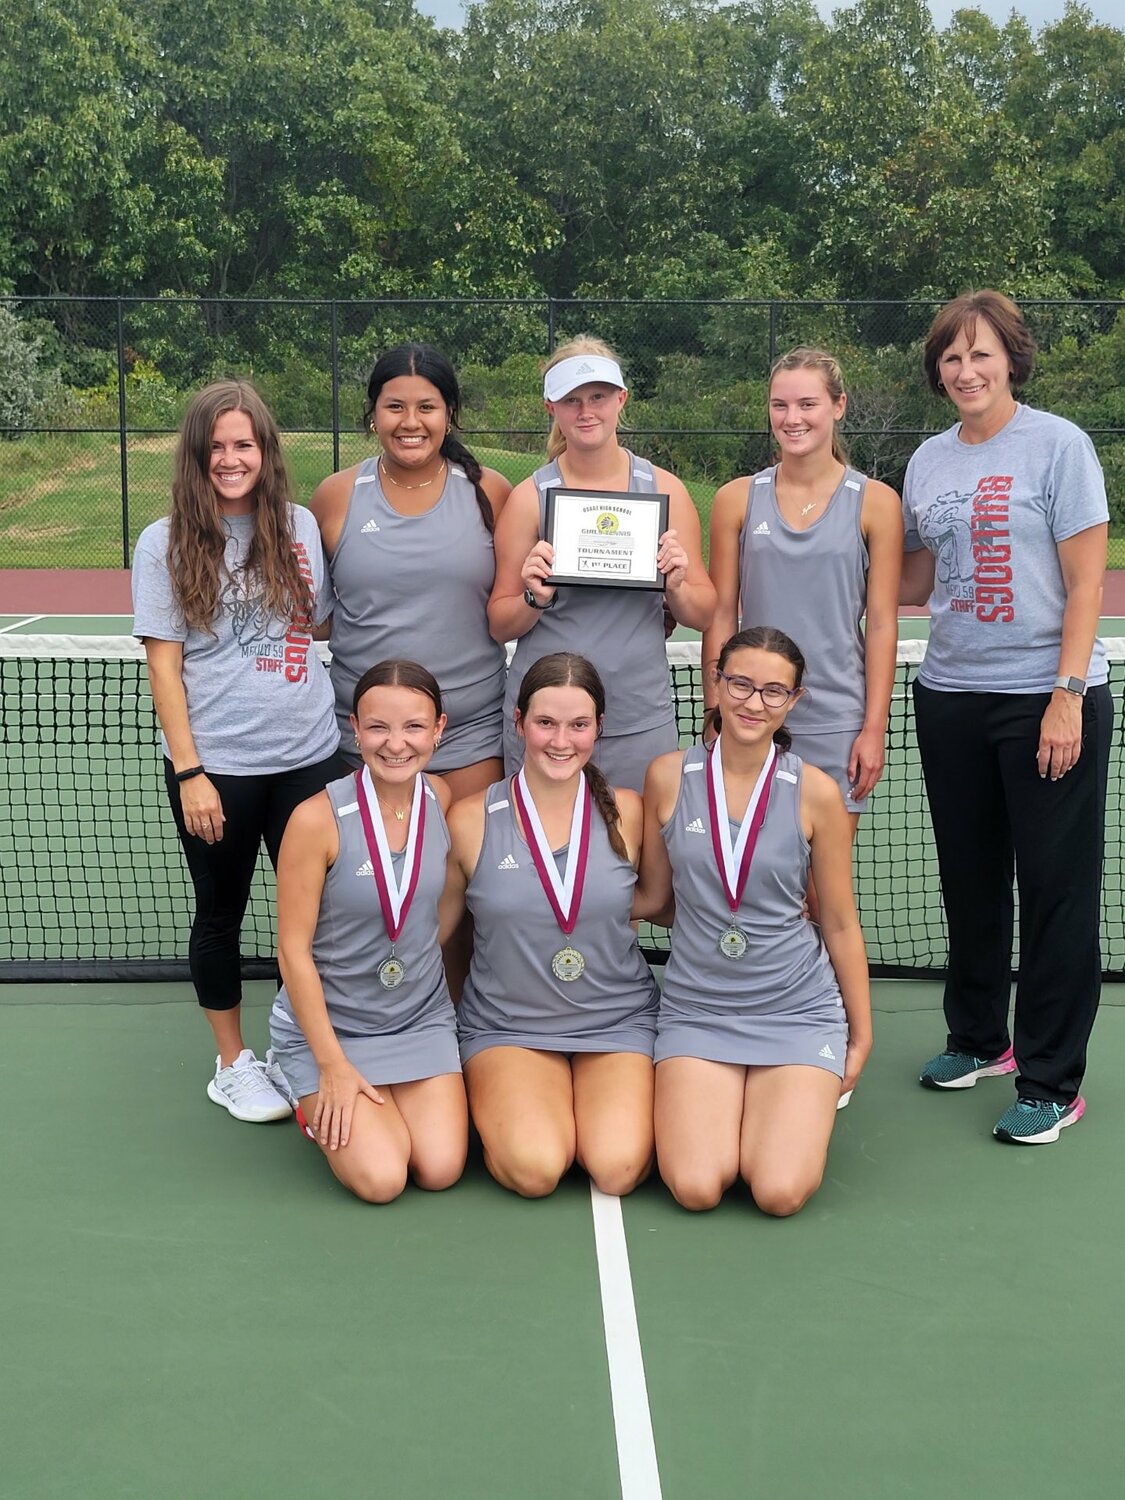 Mexico girls tennis celebrates after winning the Osage Tournament on Saturday. In the front row are the team's medalists, Lani Blair, Katie Gooch and Lucy Gleeson.